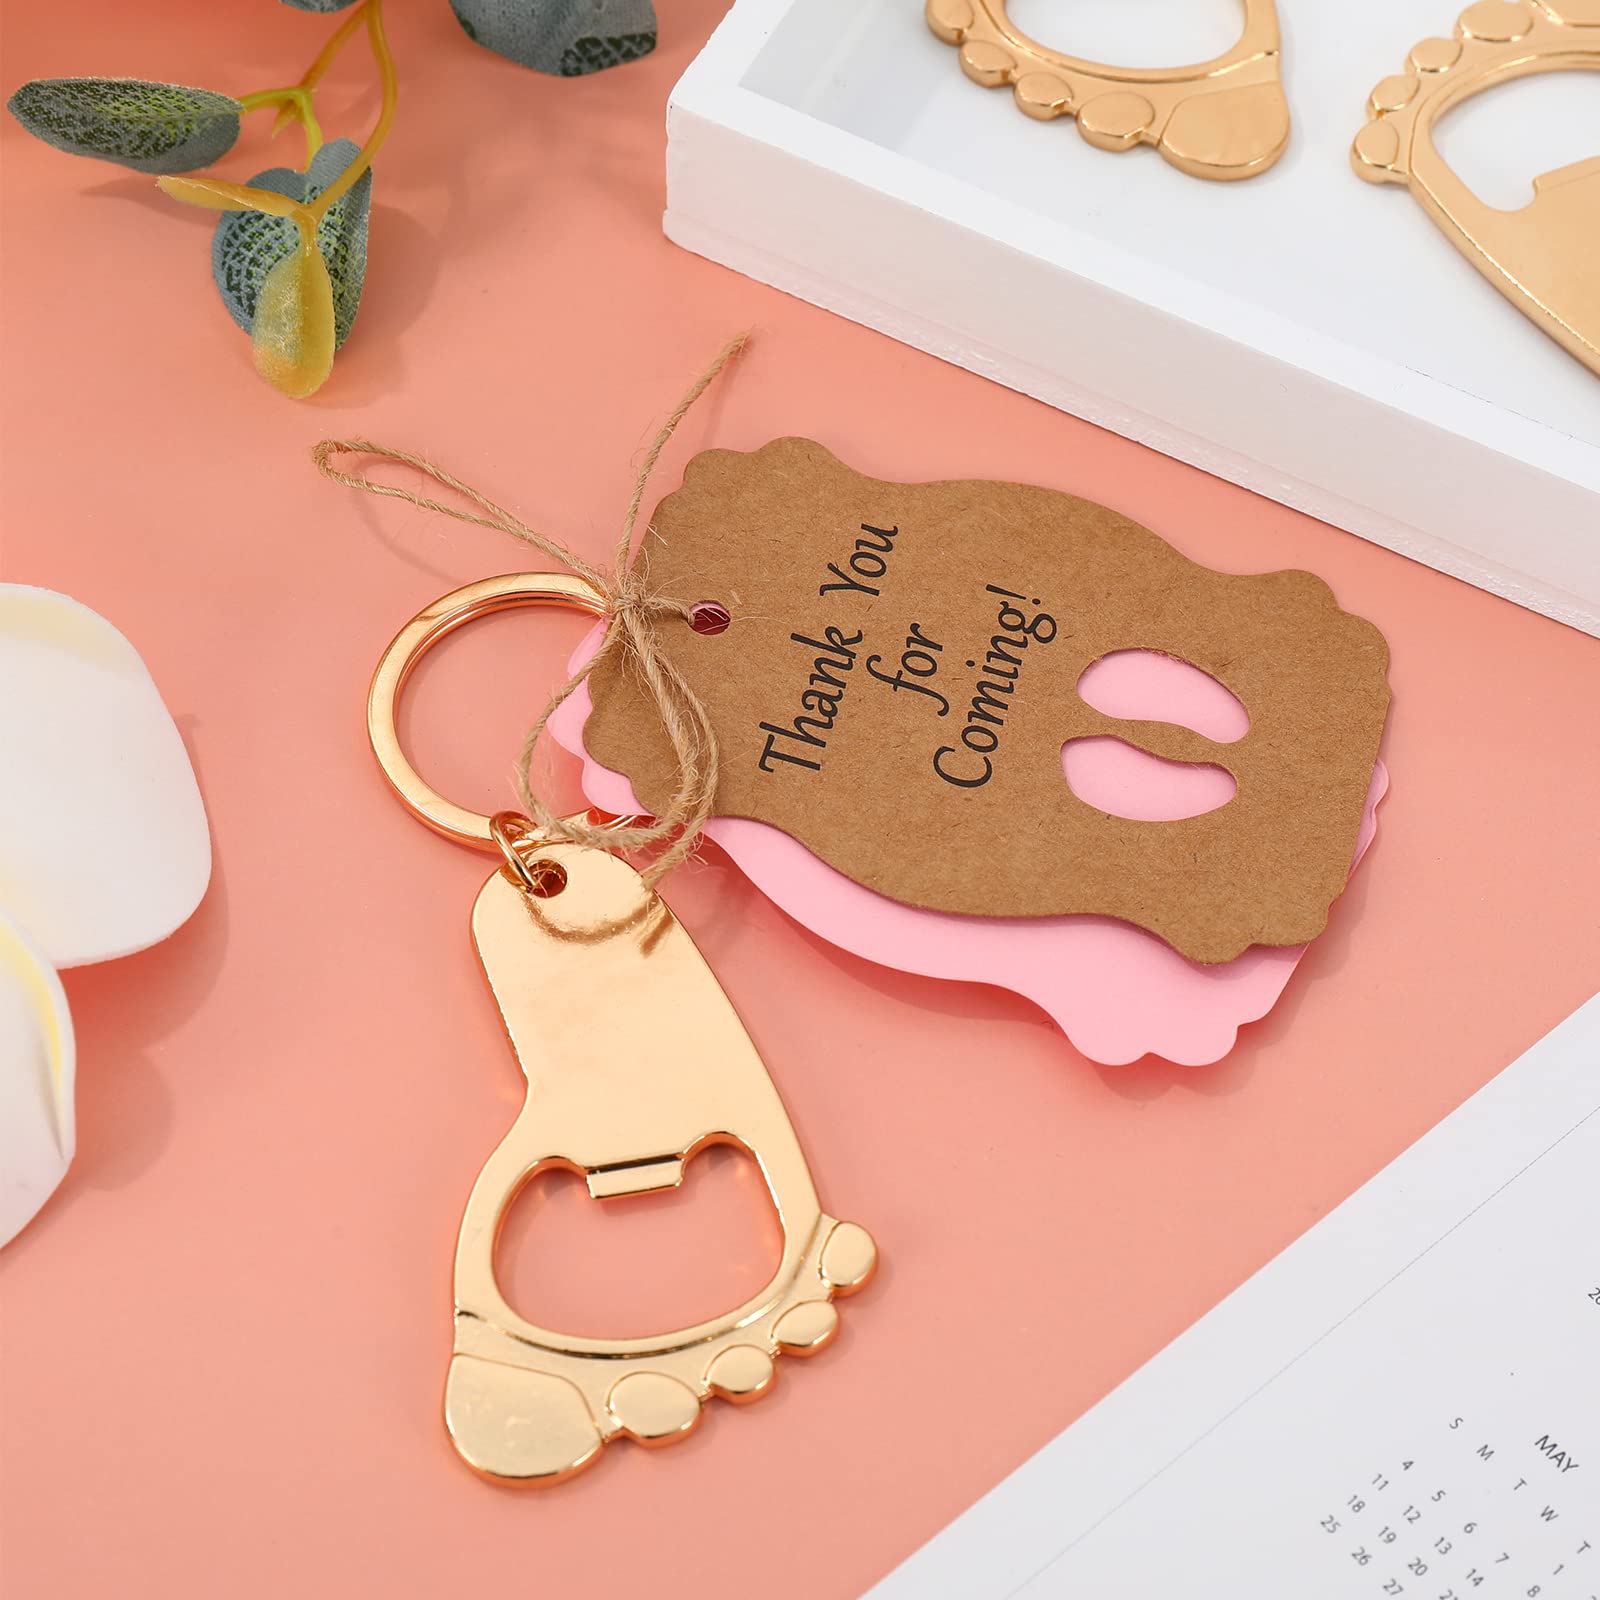 Whaline 50 Pieces Footprint Bottle Opener with Pink Organza Bags and Thank You Tags Pink Footprint Keychain Opener Baby Shower Favors for Guests Baby Birthday Party Favor Wedding Gift Decoration